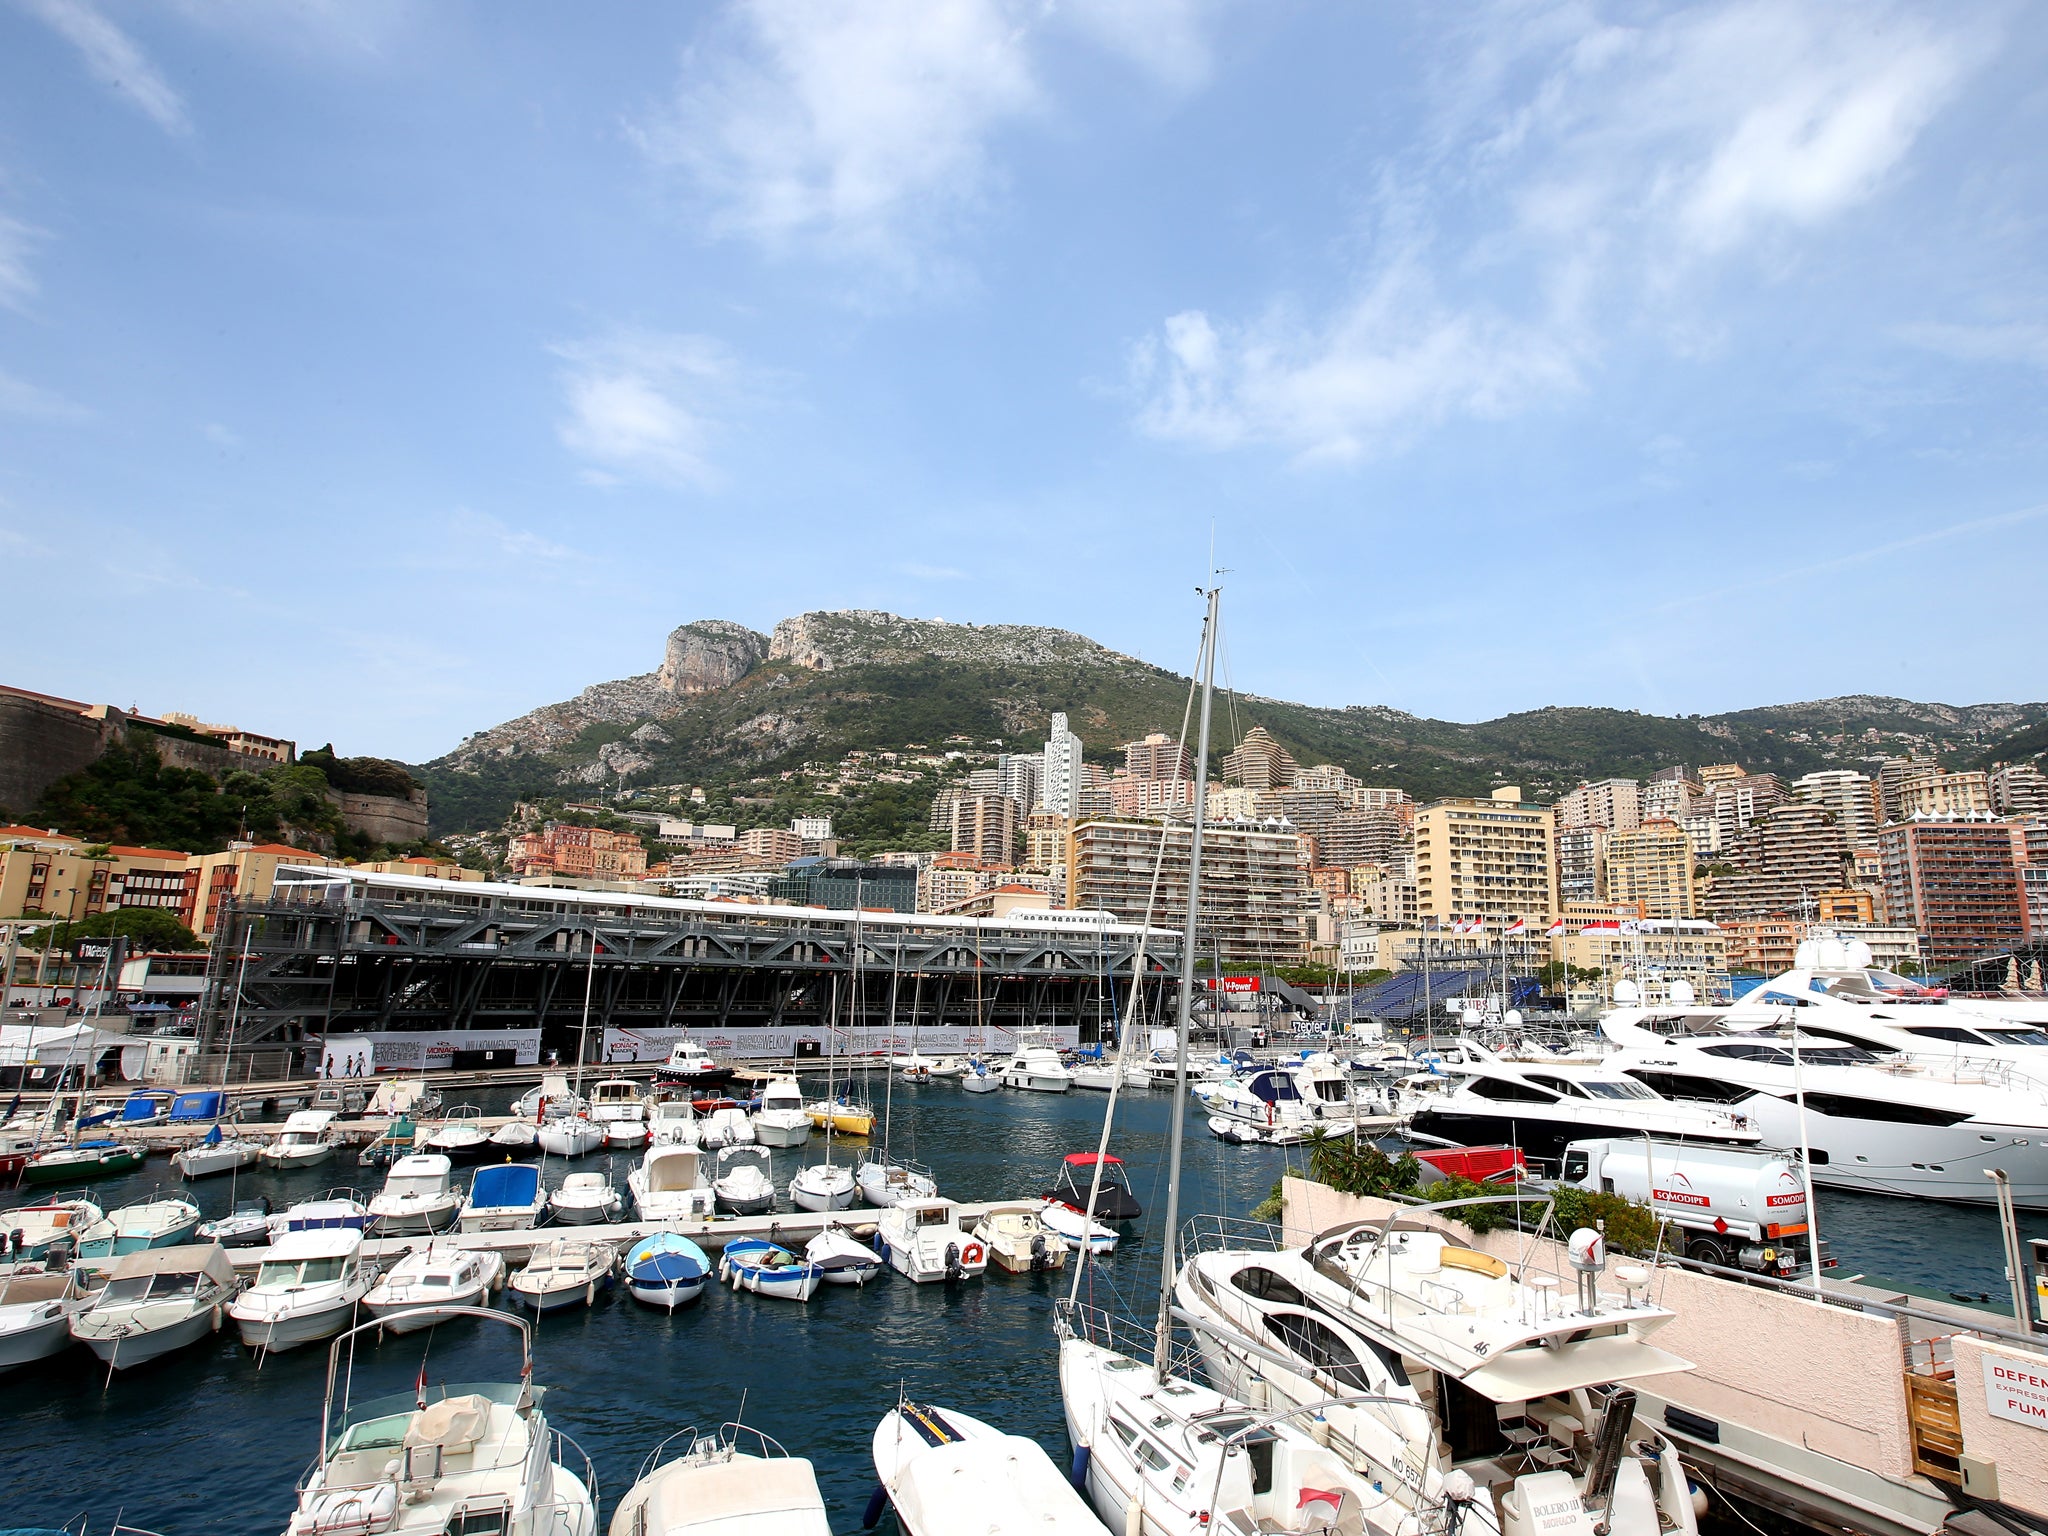 Monaco is one of three European cities to become more expensive than London for business travellers in the past year